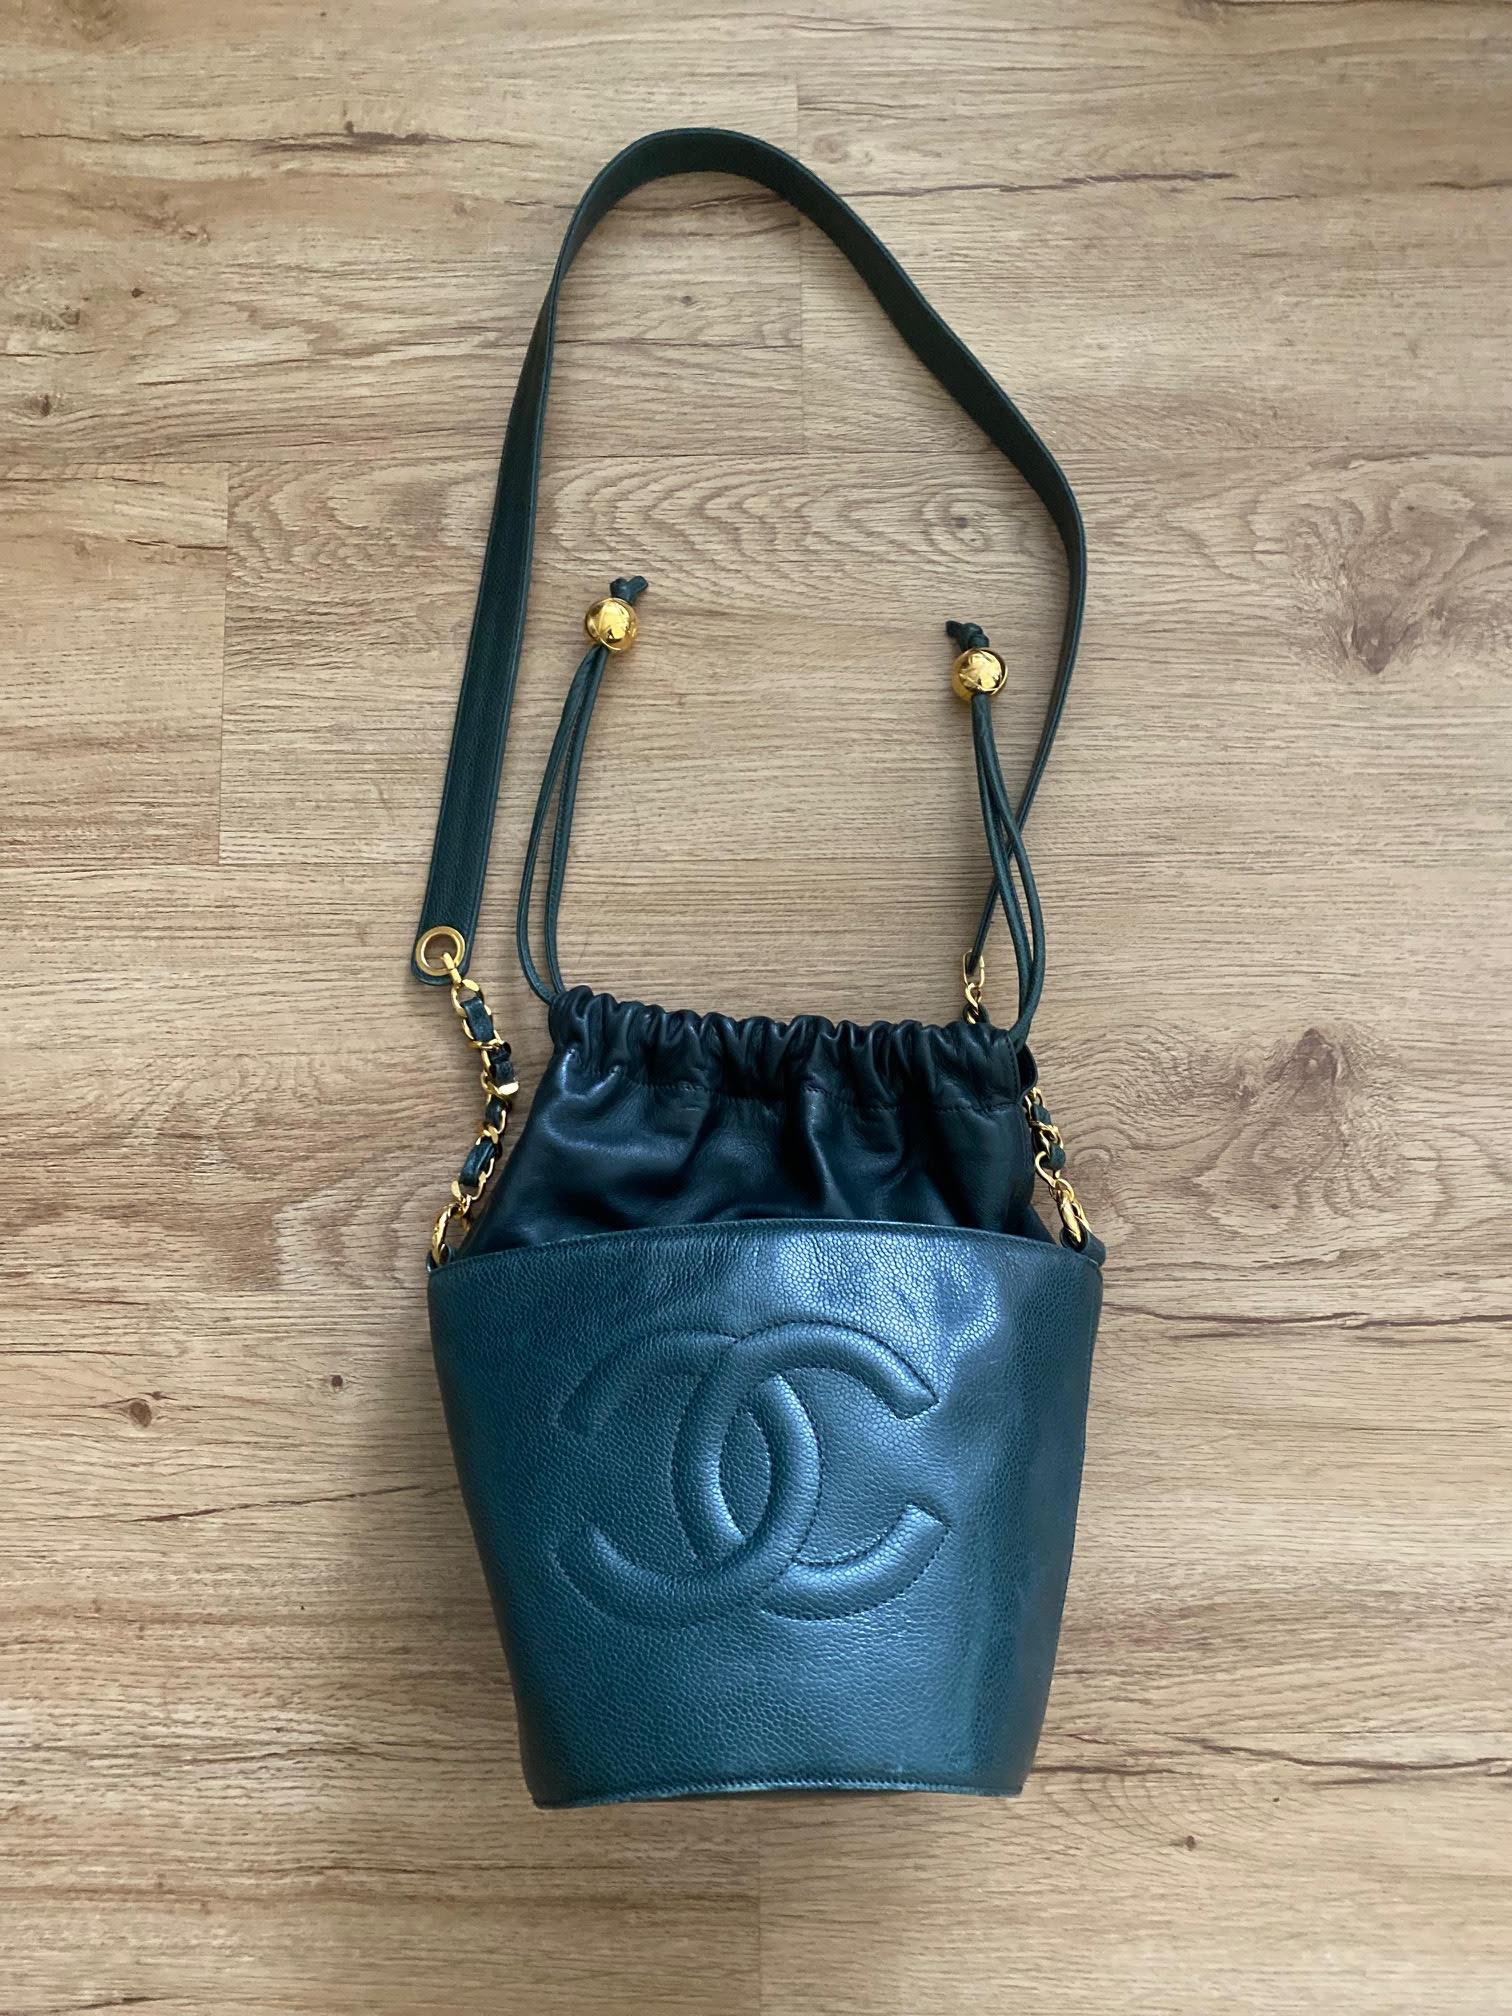 Stunning 90s Iconic CC bucket bag in a very rare color GREEN

24k gold plated cc ball hardware
double large zippered interior pockets with cc charm
round flat bottom
green caviar leather. This is the original color has not been altered

Interior